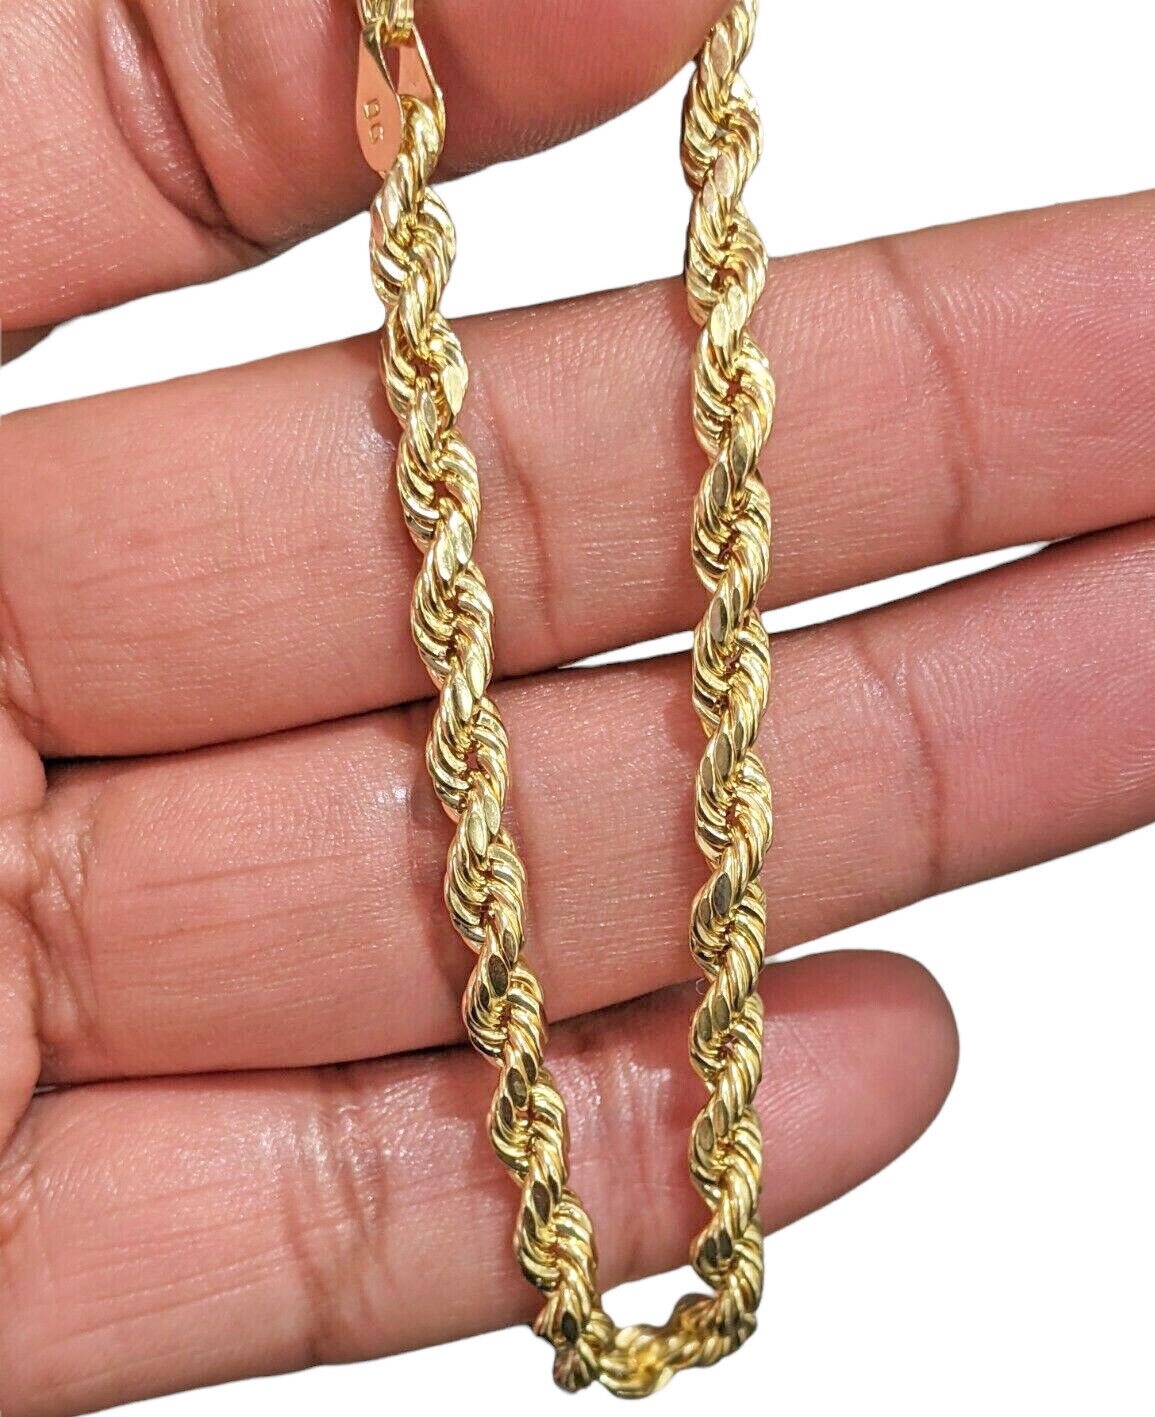 10k Yellow Gold Rope Bracelet 5mm 8" Inch Long Diamond Cuts, Real 10kt Gold